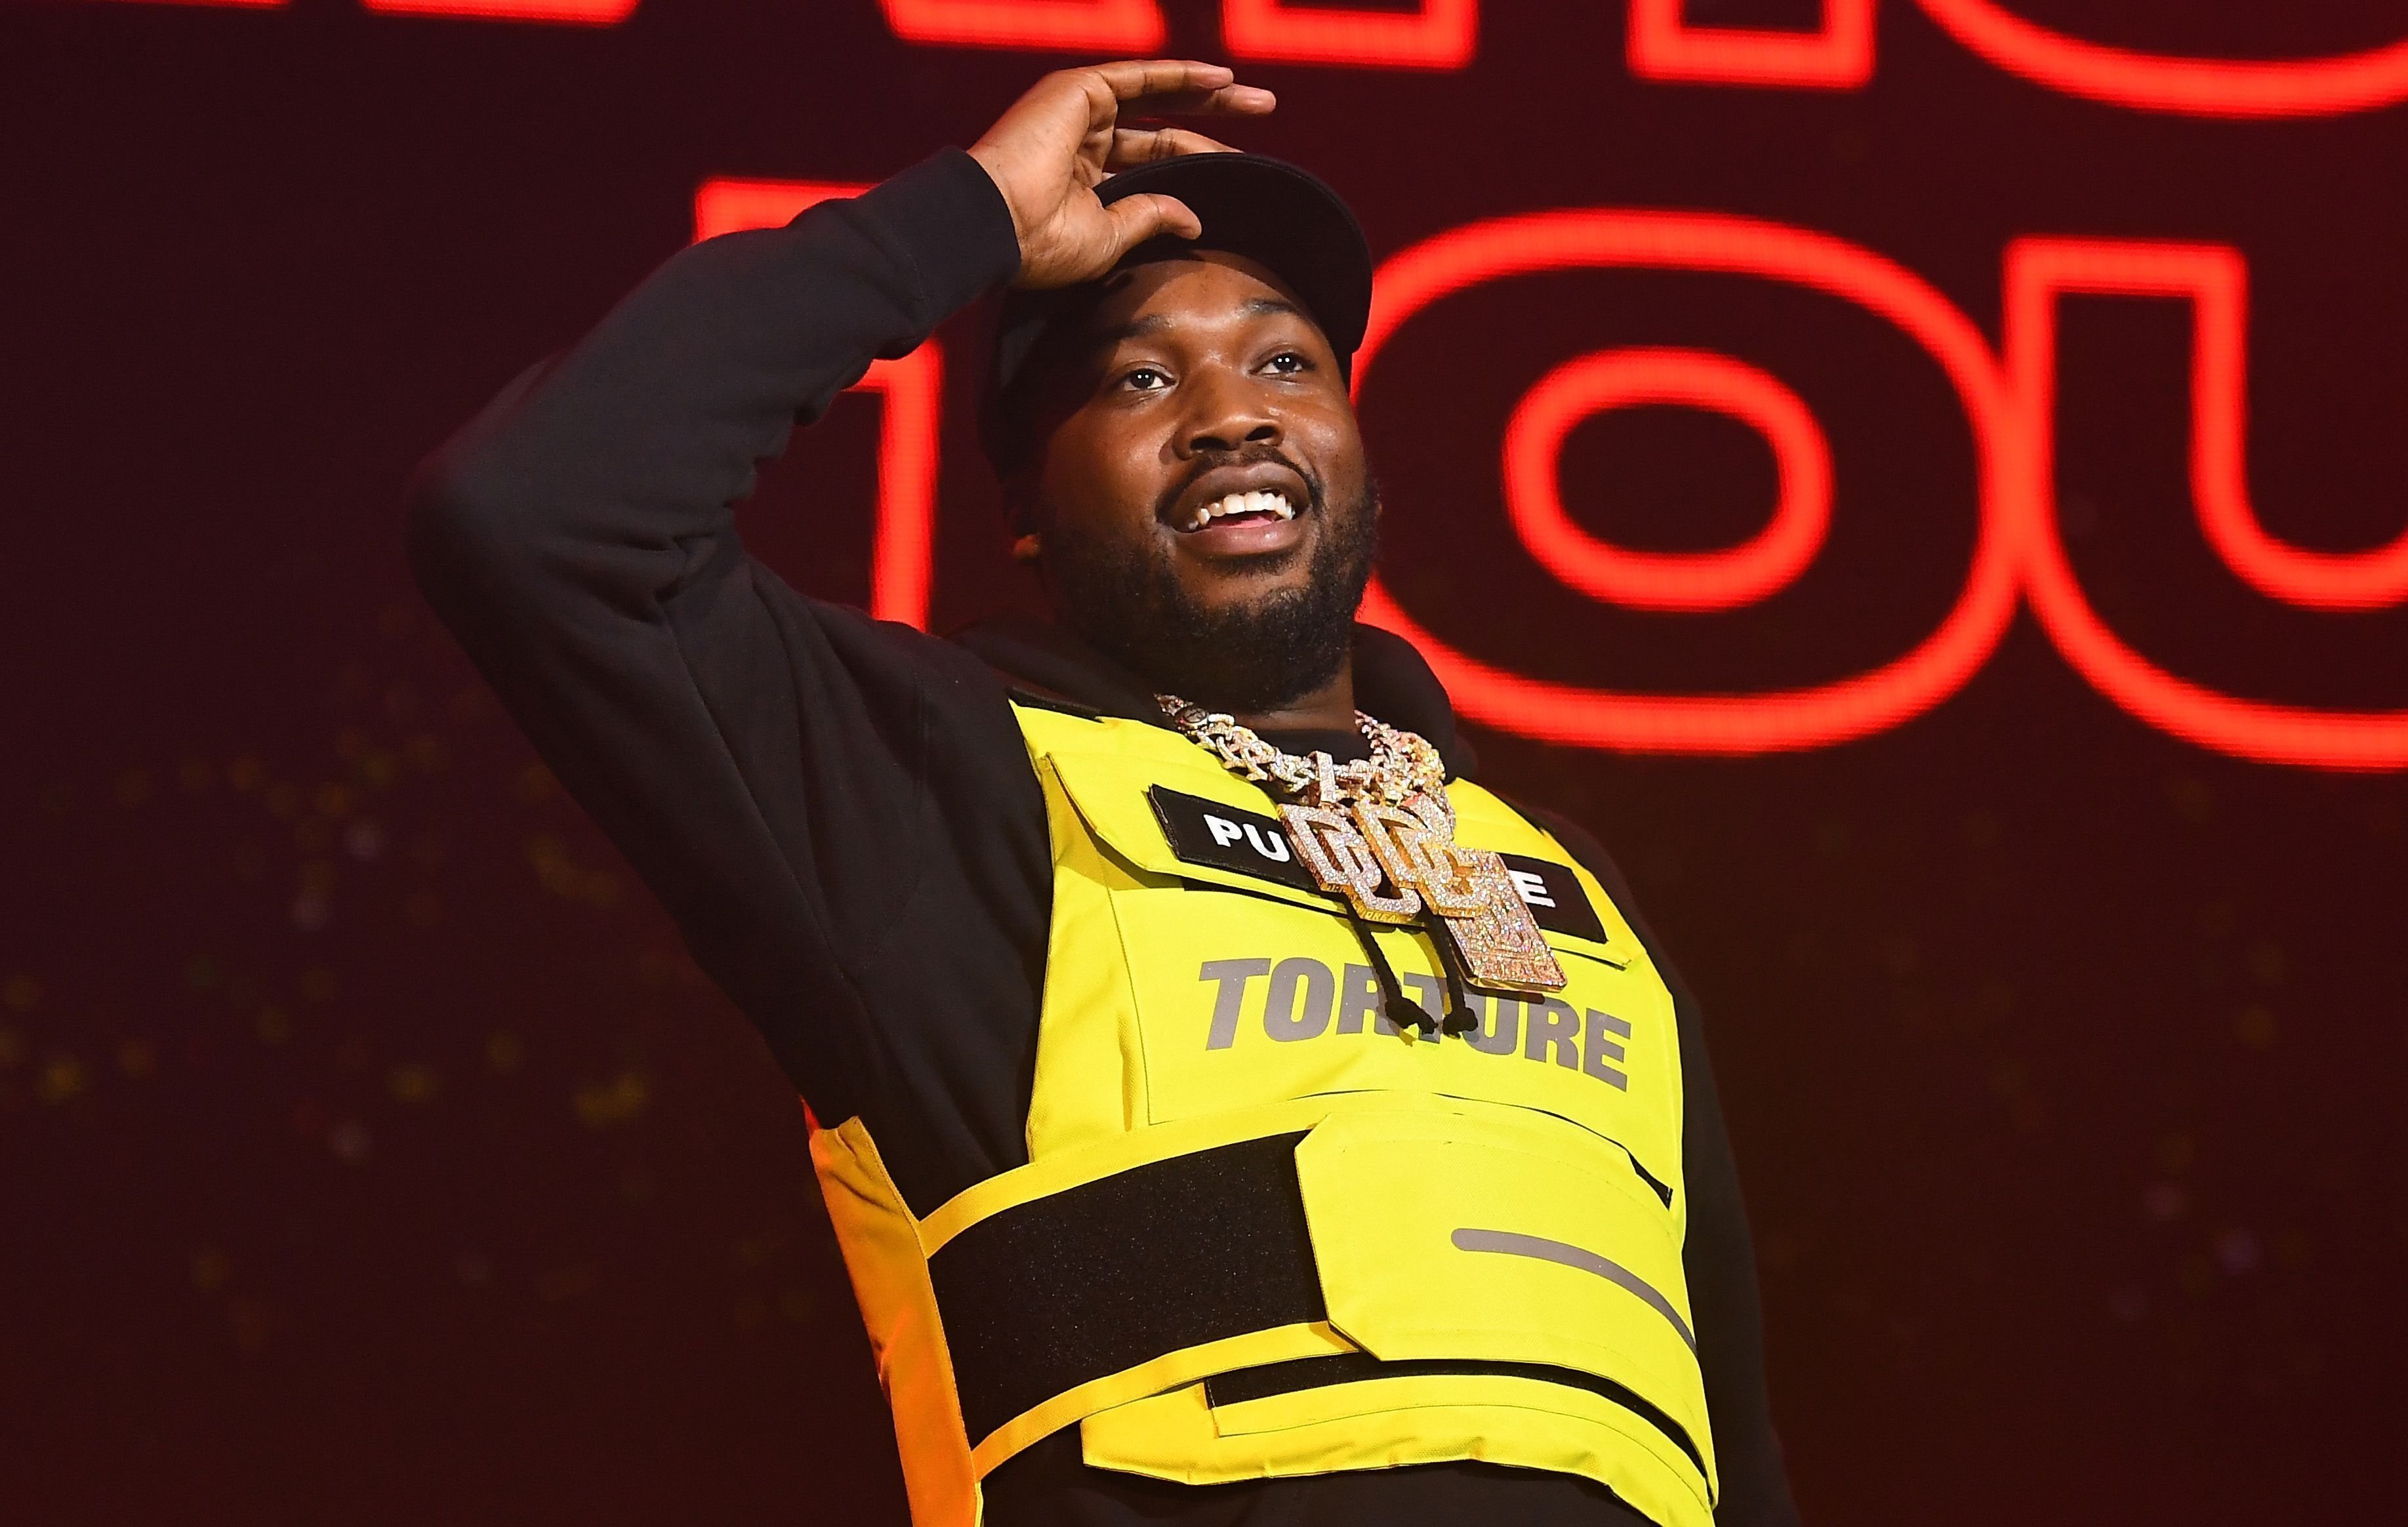 Meek Mill performs in Atlanta, Georgia in March 2019 at The Motivation Tour | Source: Getty Images